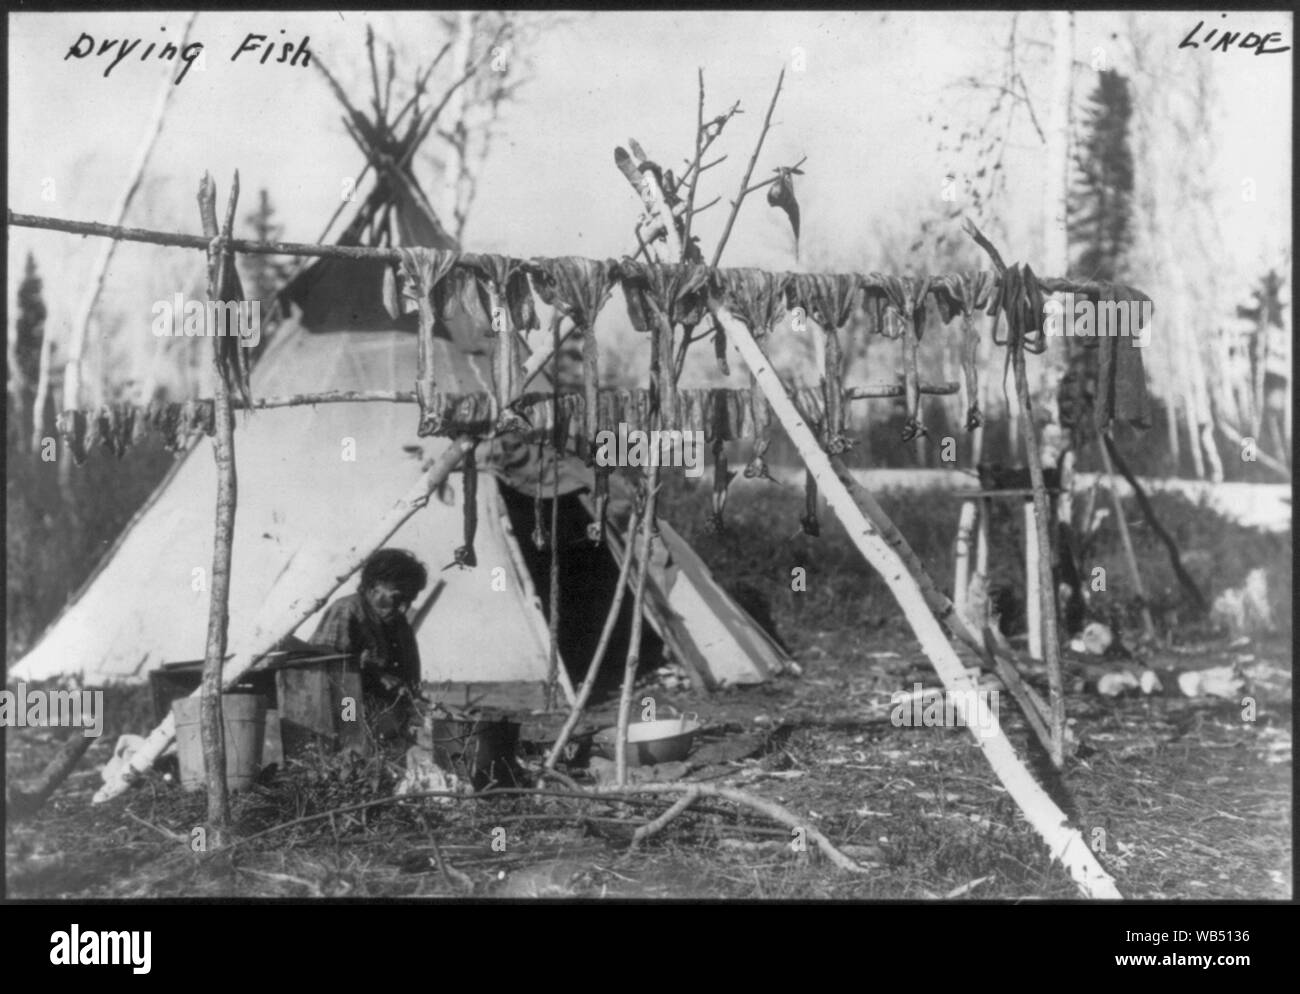 Elderly Indian woman outside teepee, with fish drying on poles in foreground Abstract/medium: 1 photographic print. Stock Photo